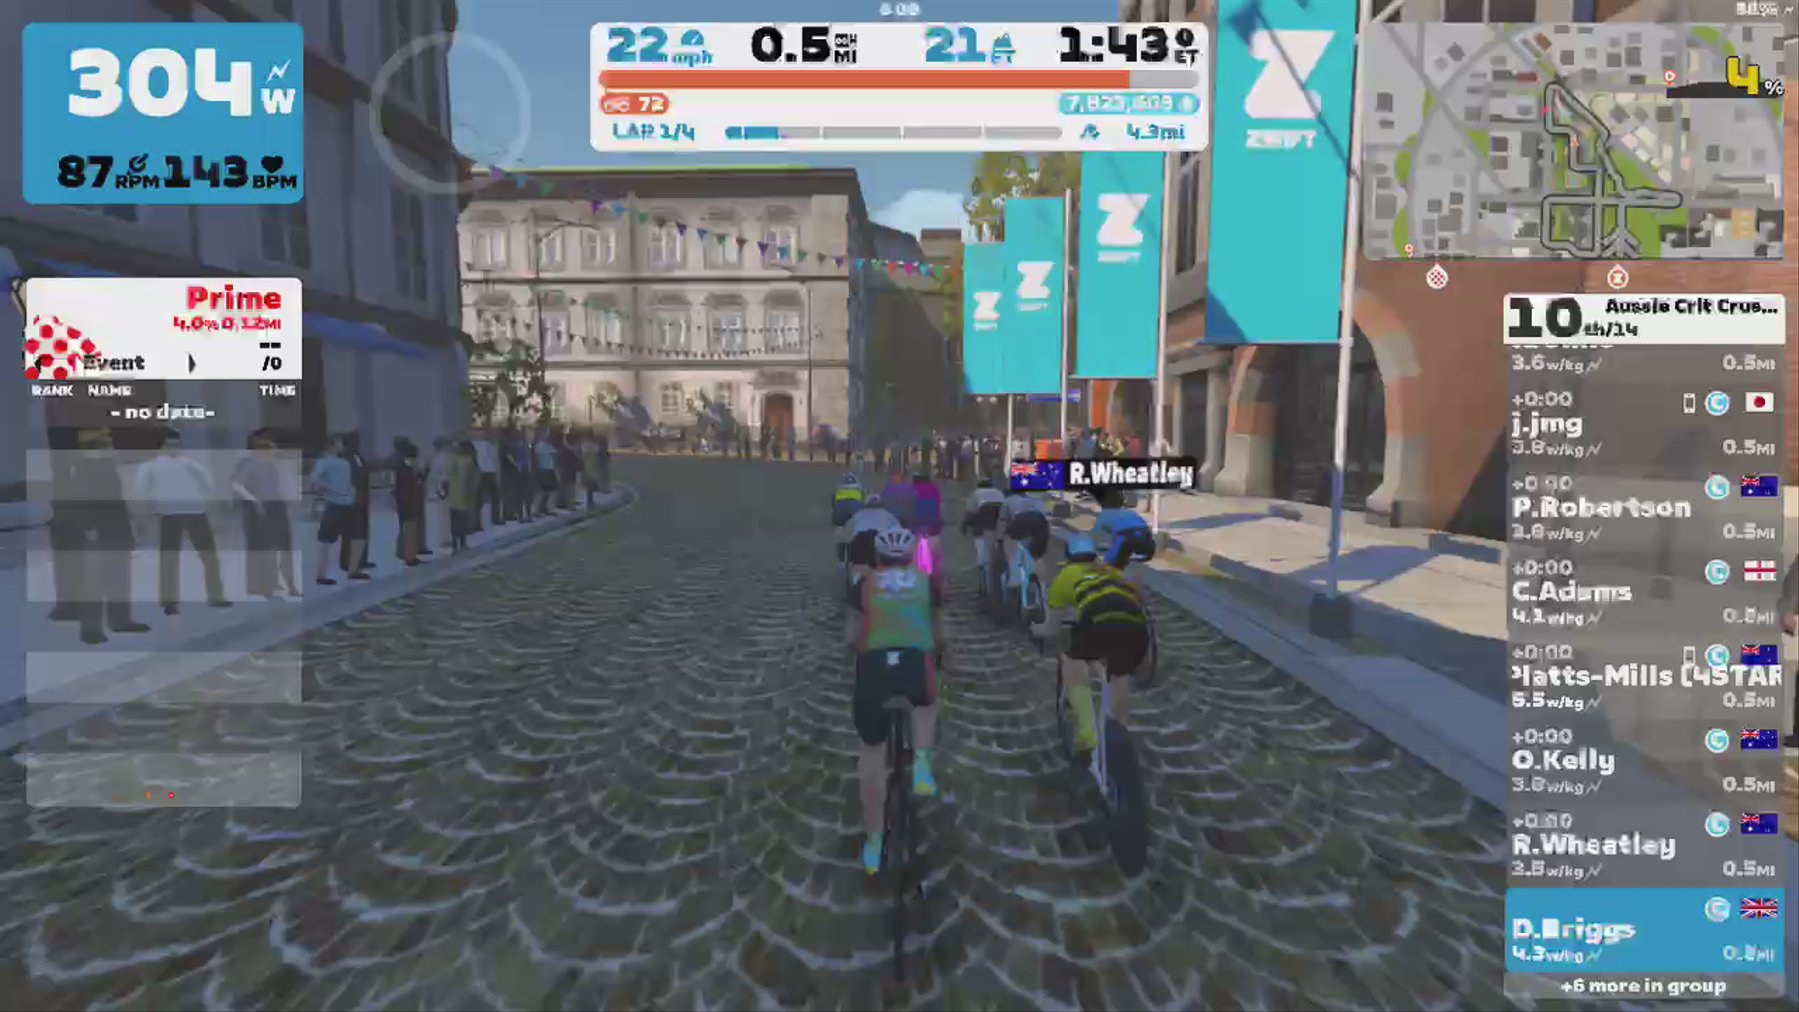 Zwift - Race: Aussie Crit Crushers Race 1 (C) on Downtown Dolphin in Crit City